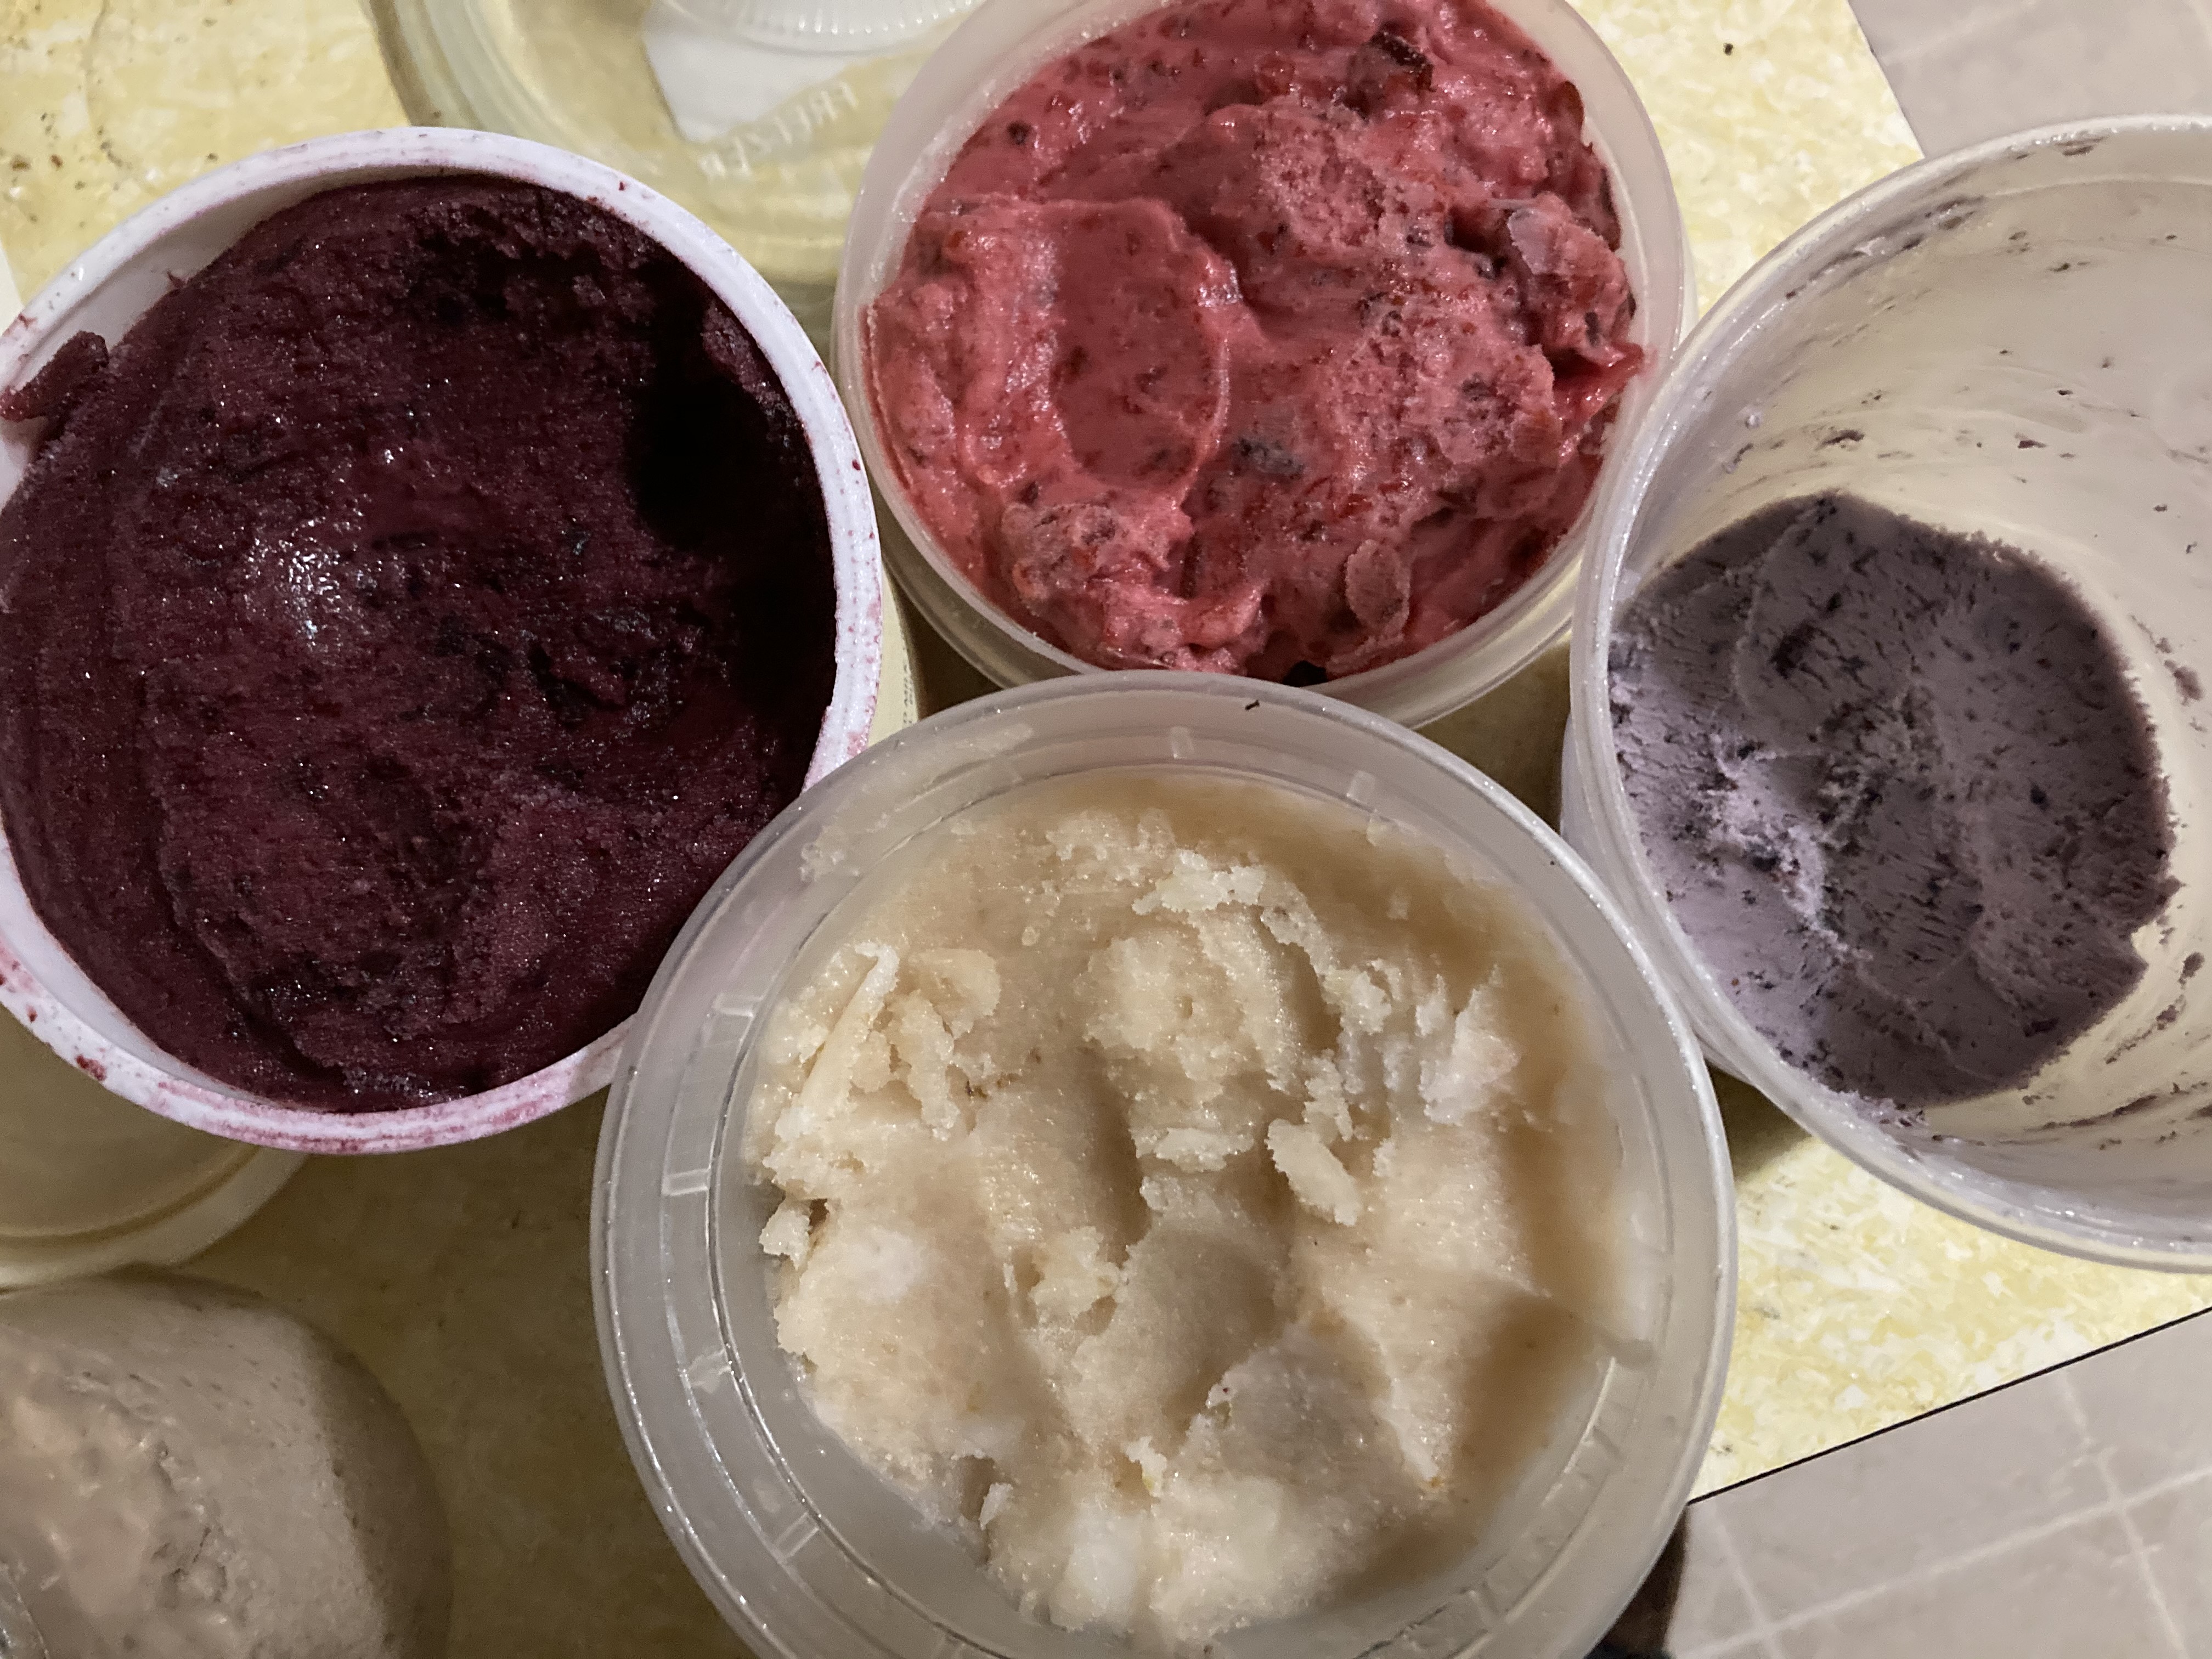 Three plastic containers with different colored homemade sherbet and one of homemade ice-cream. Dark purple grape, lighter red violet Italian Prune, Pale yellow pear and light lavender blueberry ice-cream that's almost gone